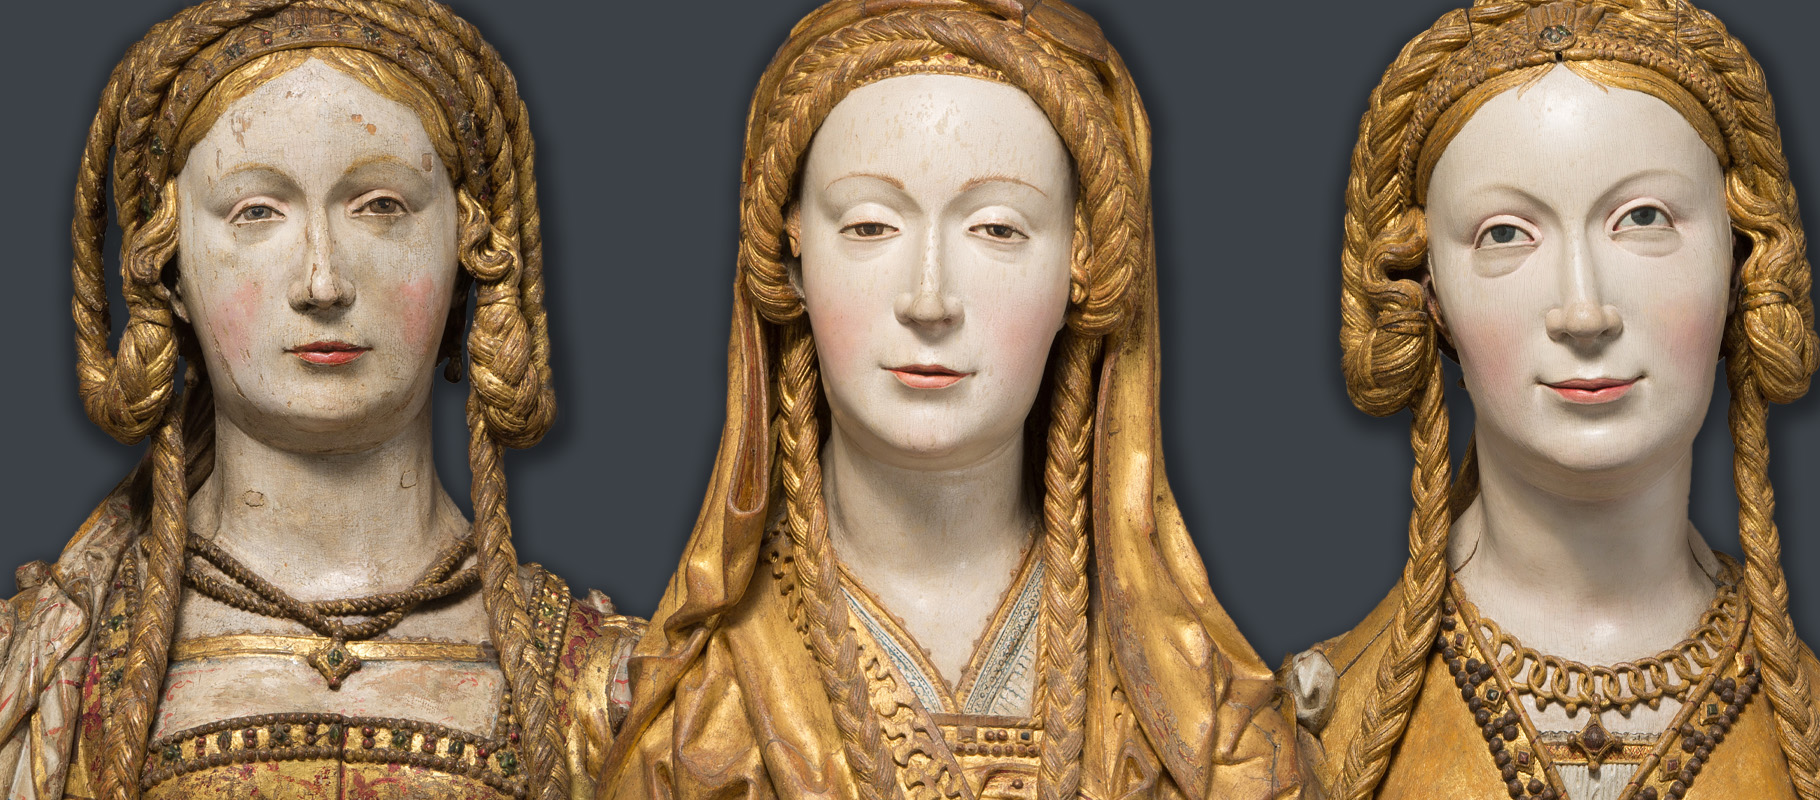 Reliquary busts